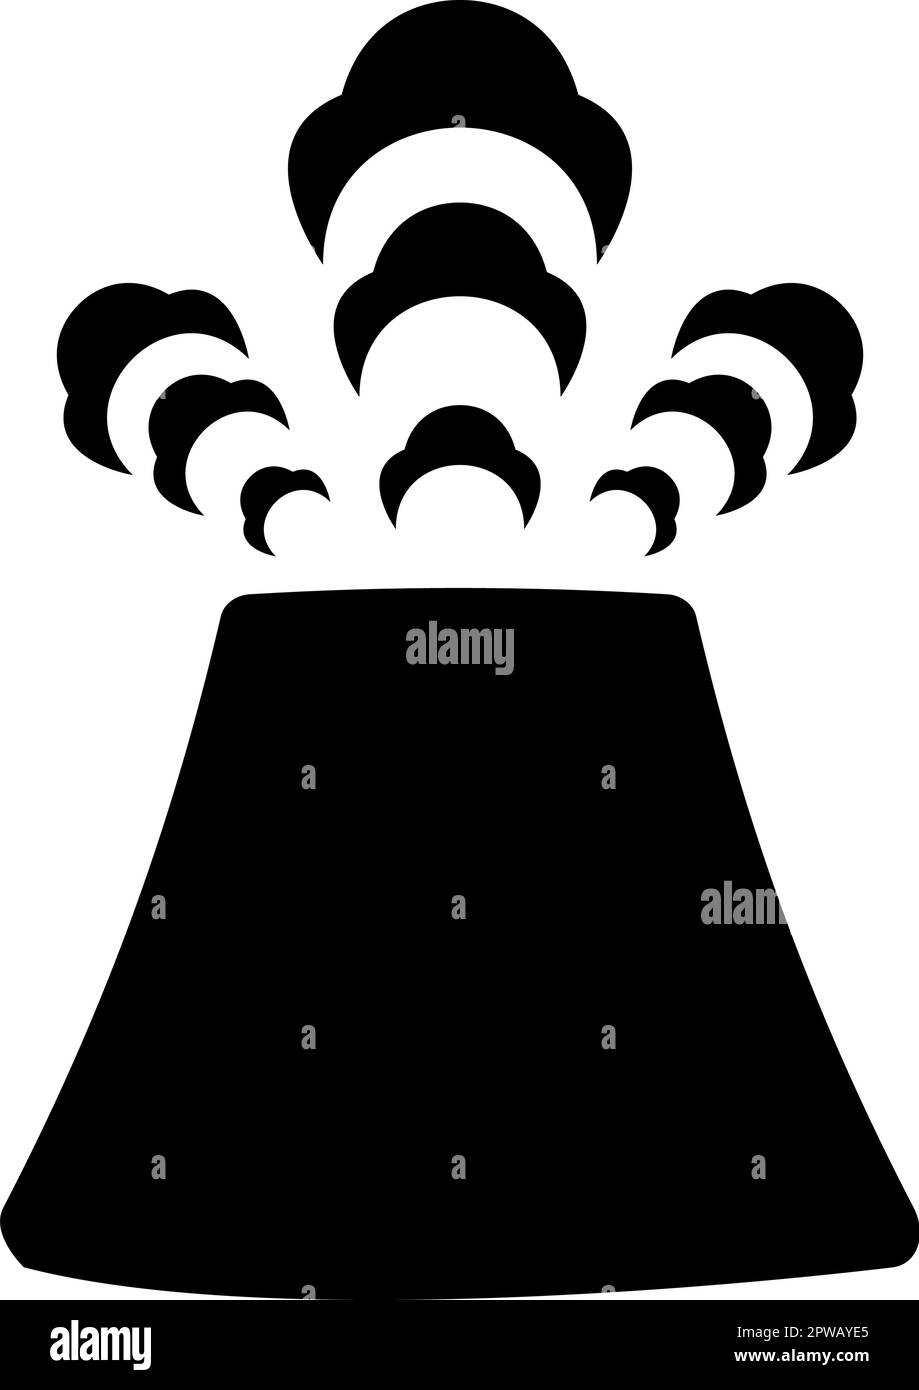 Volcano activity with smoke eruption concept natural pollution cloud problem disaster volcanic mountain landscape erupt dust earthquake catastrophe icon black color vector illustration image flat style Stock Vector